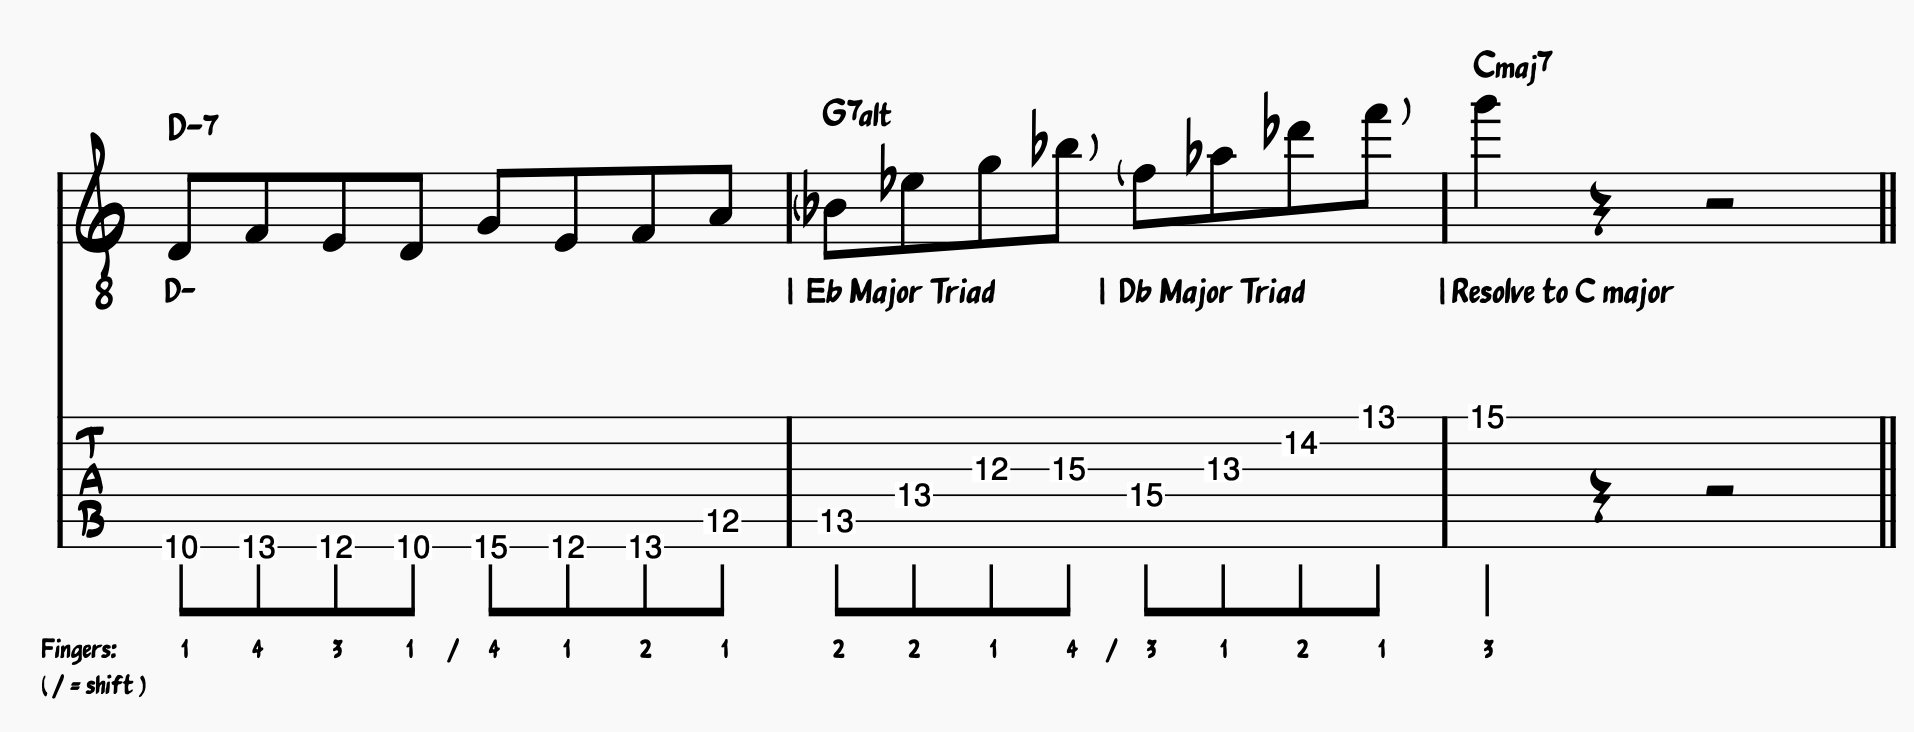 Jazz Lick 5: Non-diatonic triads over the dominant chord pt. II